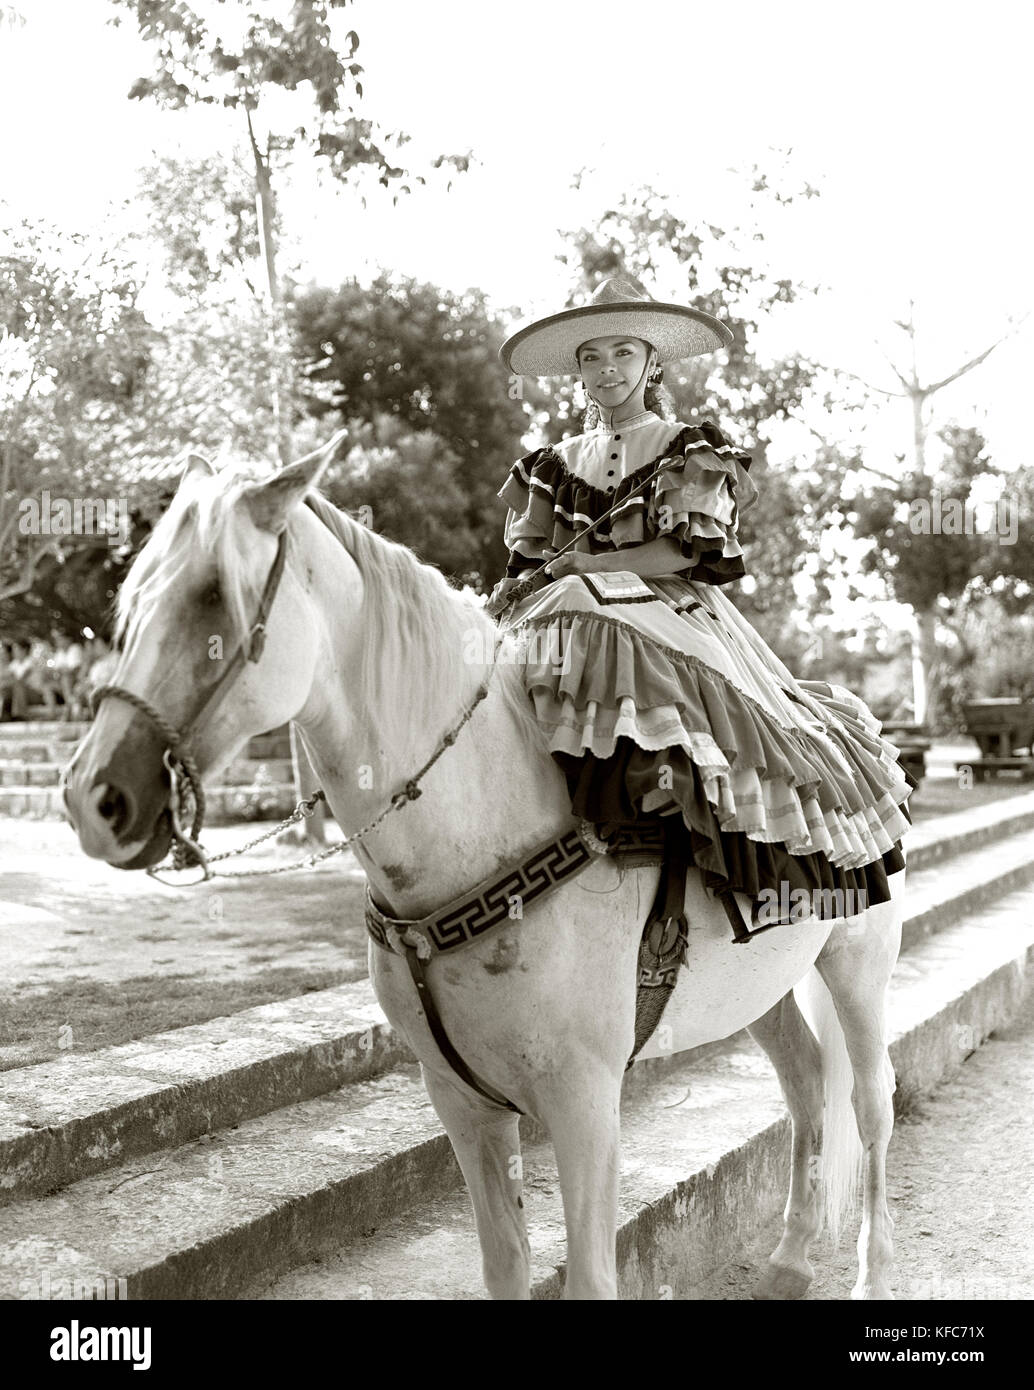 MEXICO, Maya Riviera, Mexican Cowgirl wearing sombrero sitting on horse (B&W) Stock Photo